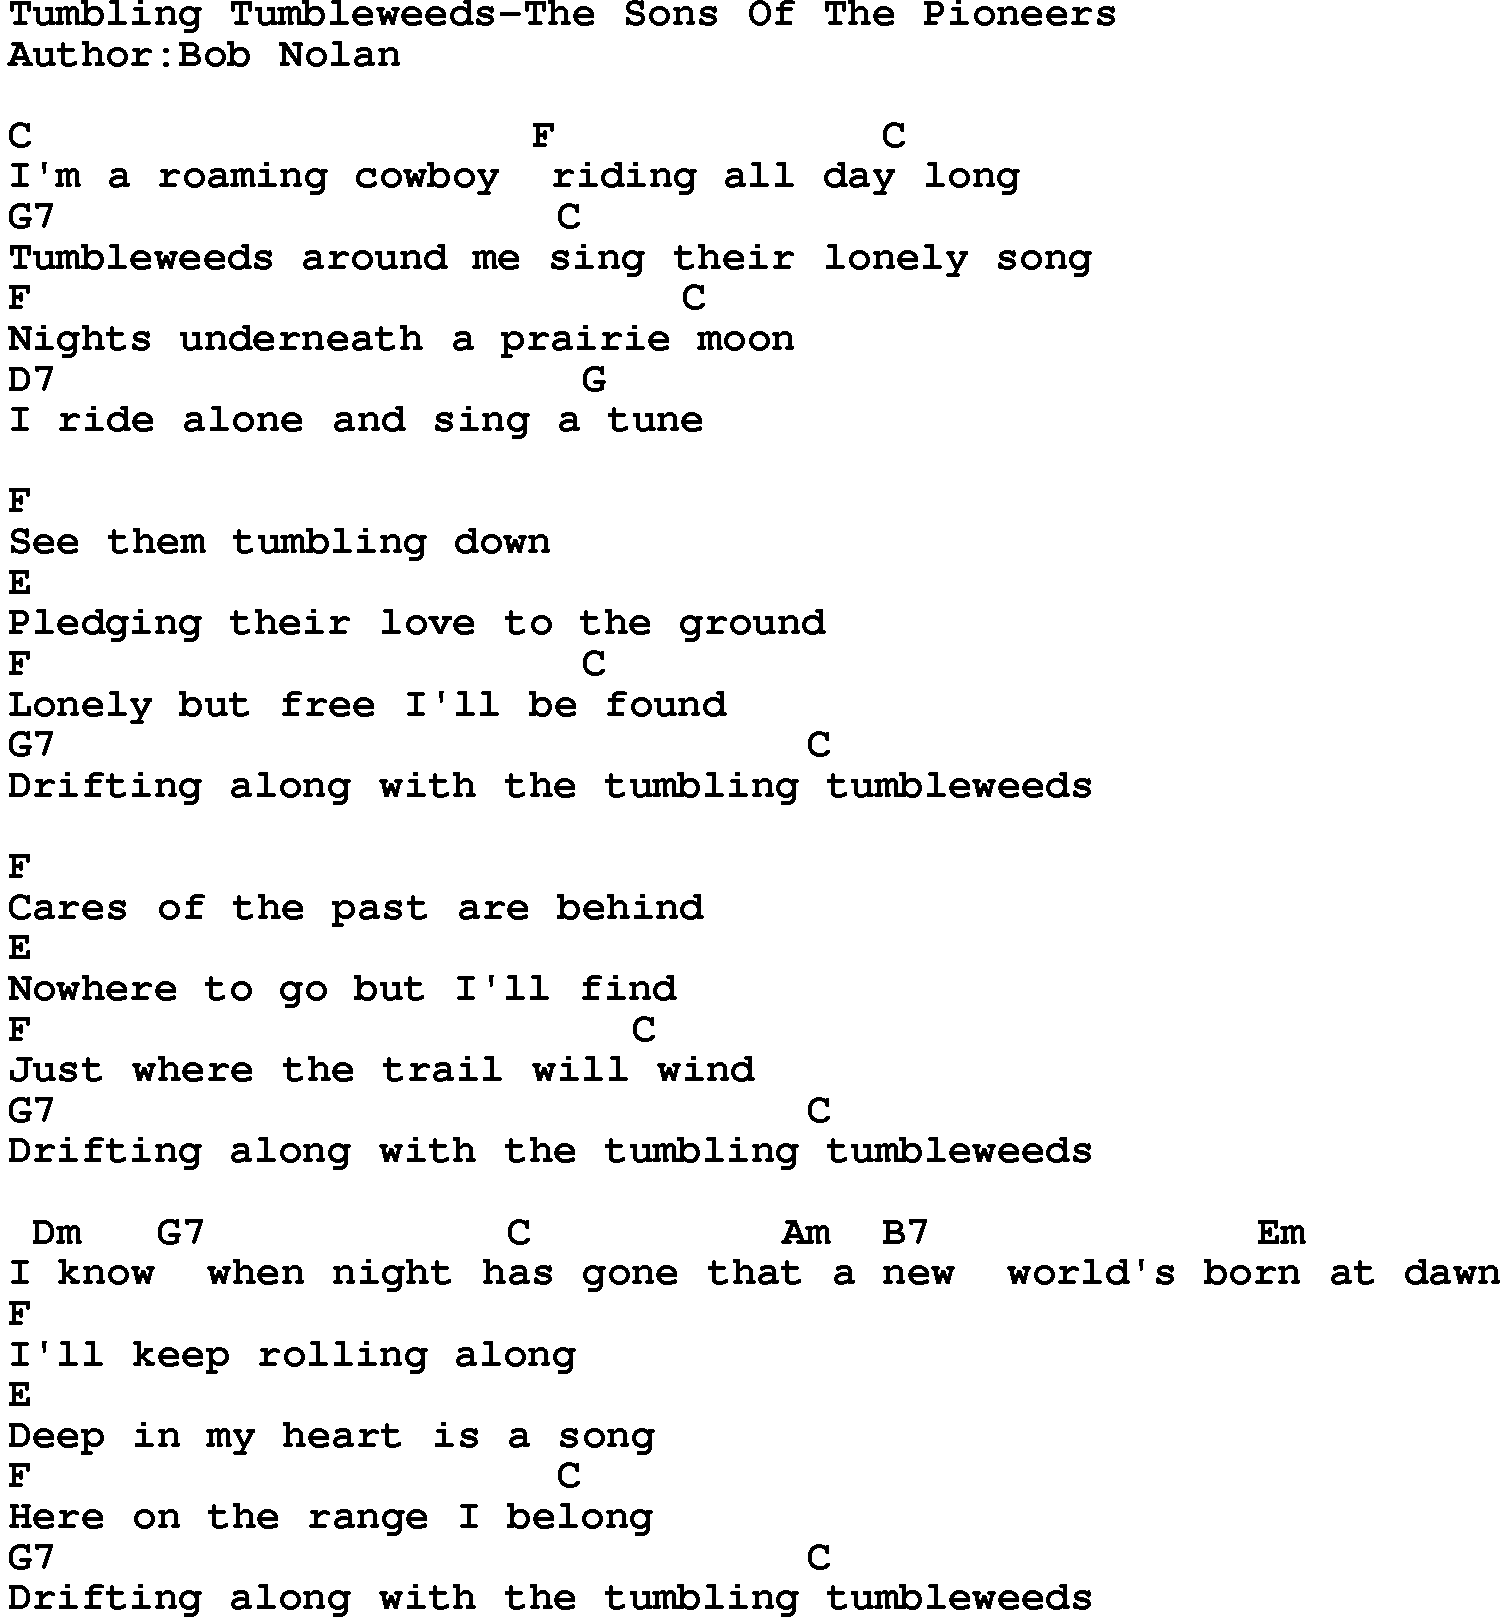 Country music song: Tumbling Tumbleweeds-The Sons Of The Pioneers lyrics and chords